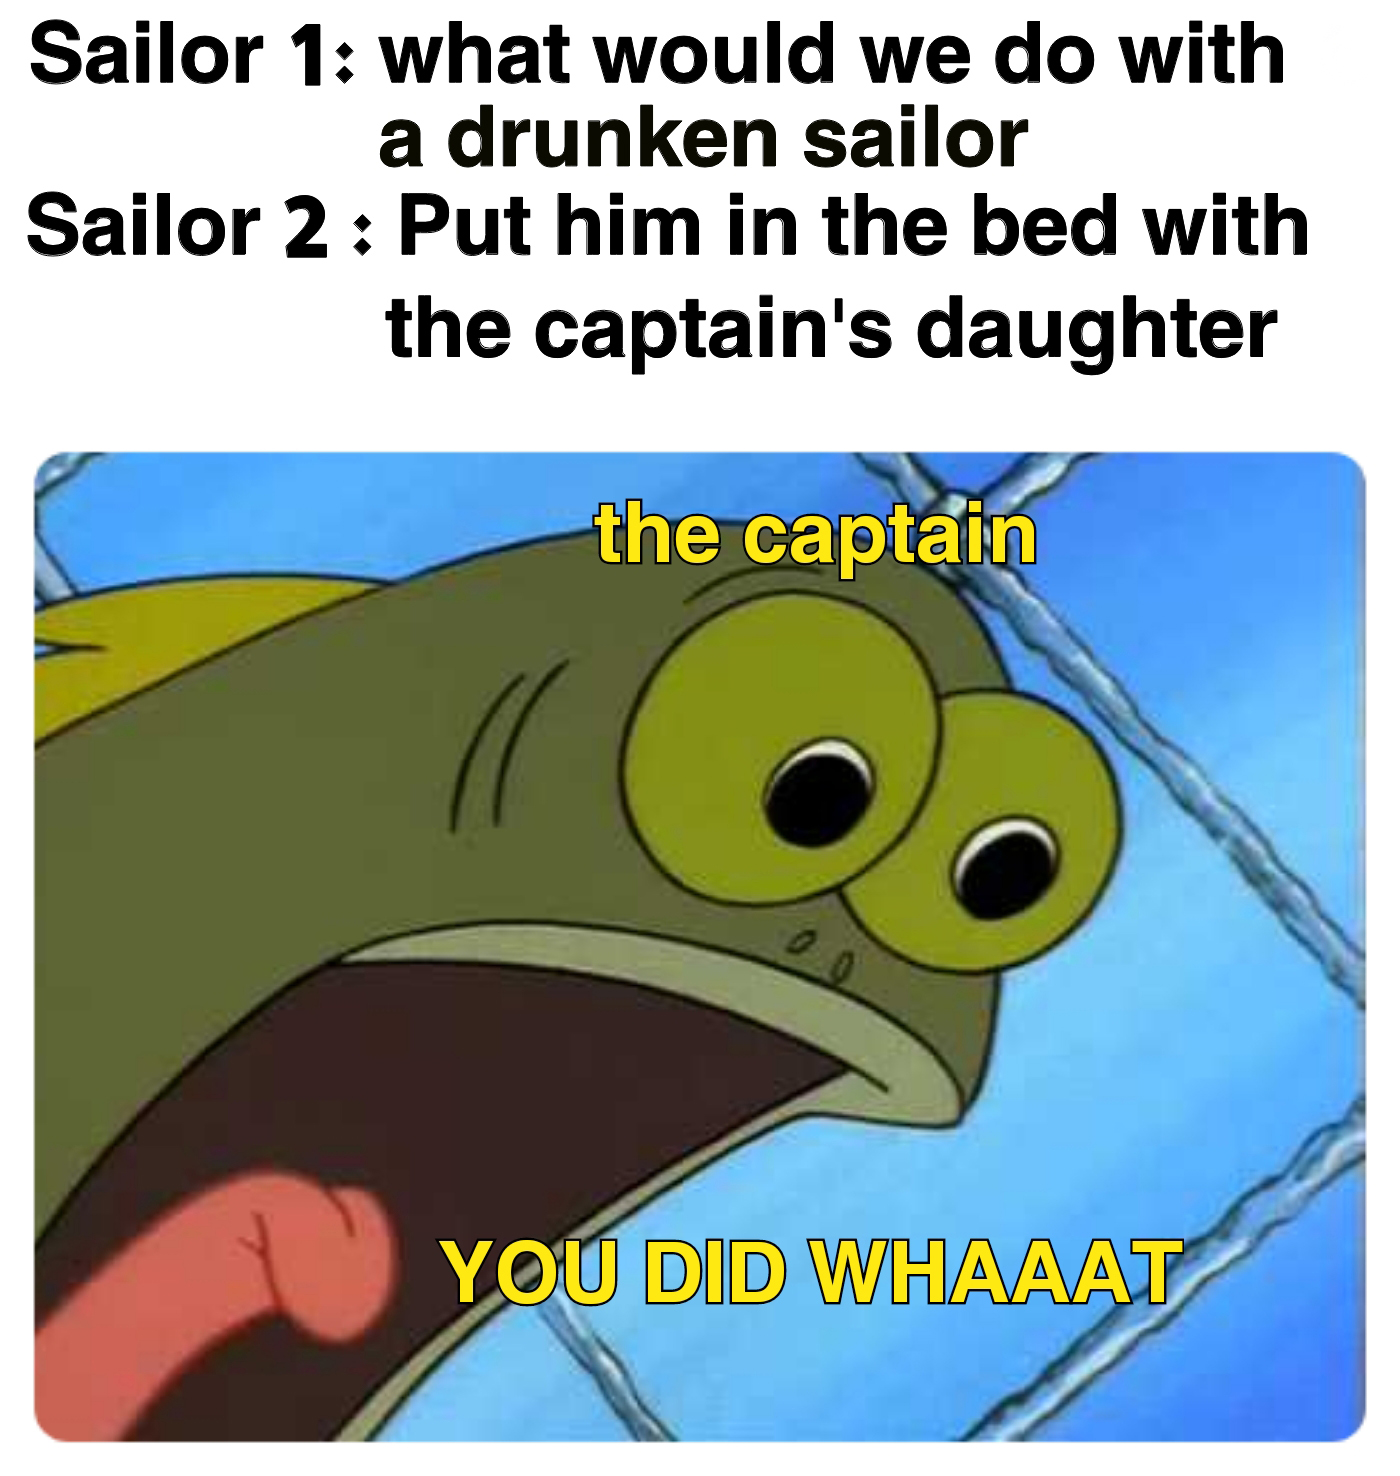 funny memes and pics - fauna - Sailor 1 what would we do with a drunken sailor Sailor 2 Put him in the bed with the captain's daughter the captain You Did Whaaat